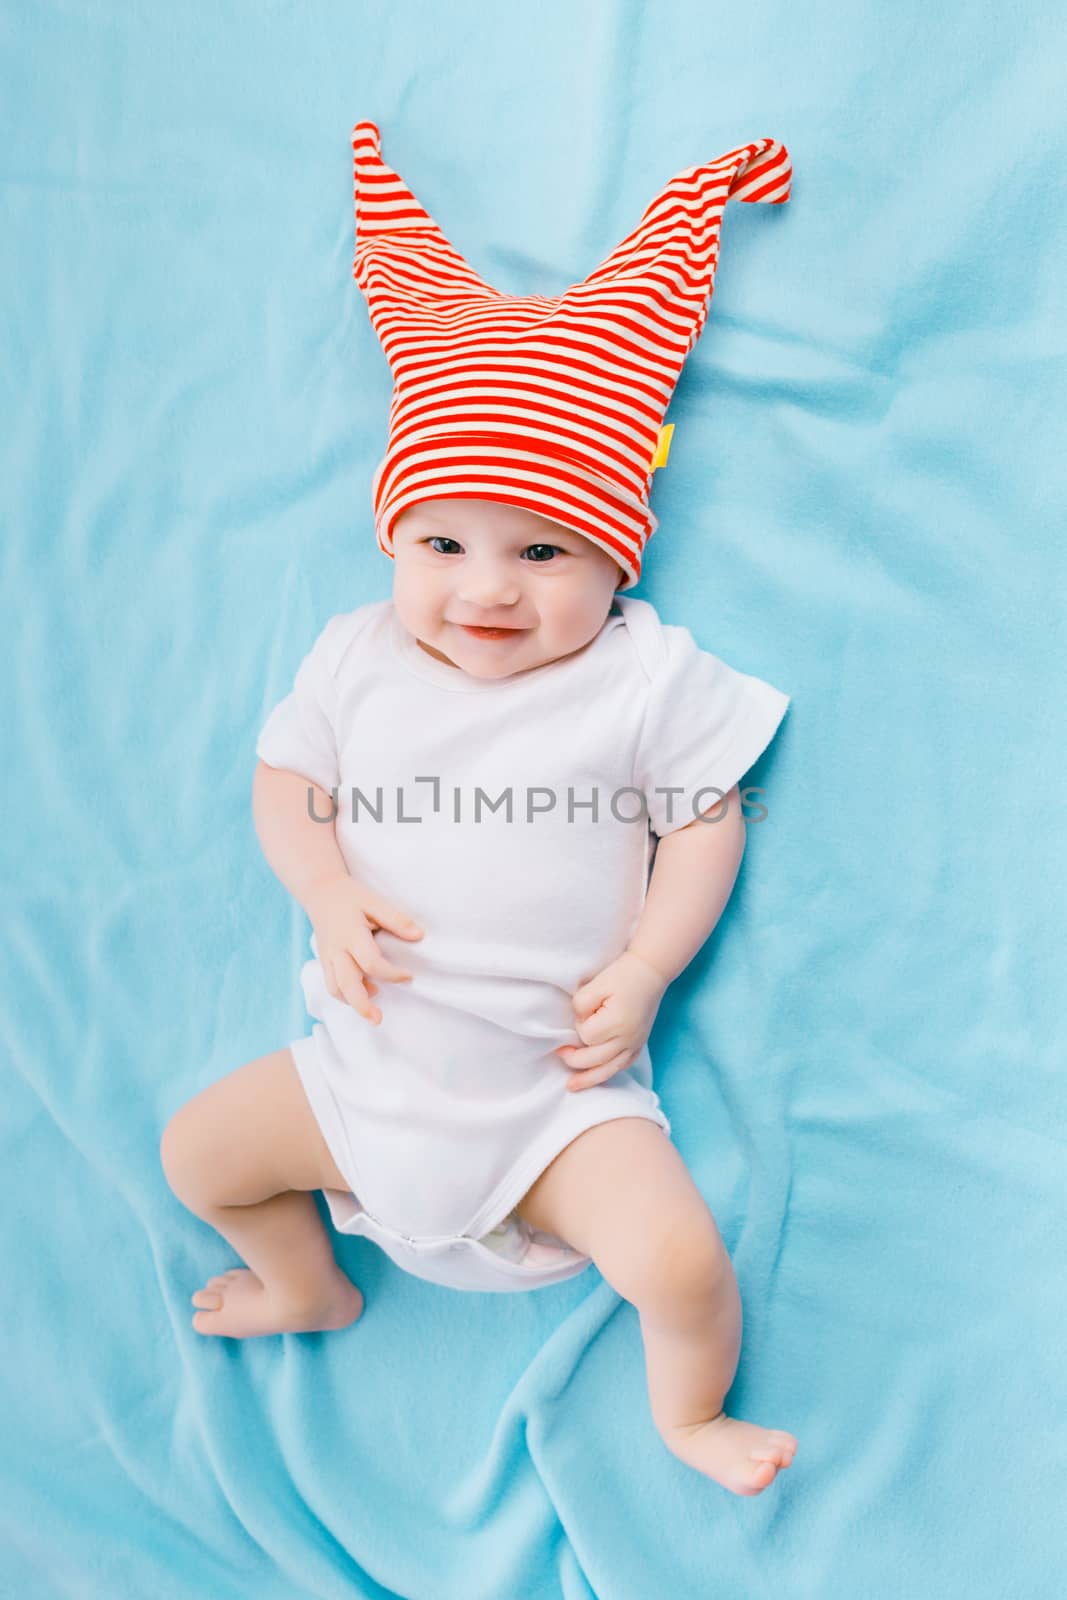 cute toddler in a striped hat on a blue blanket